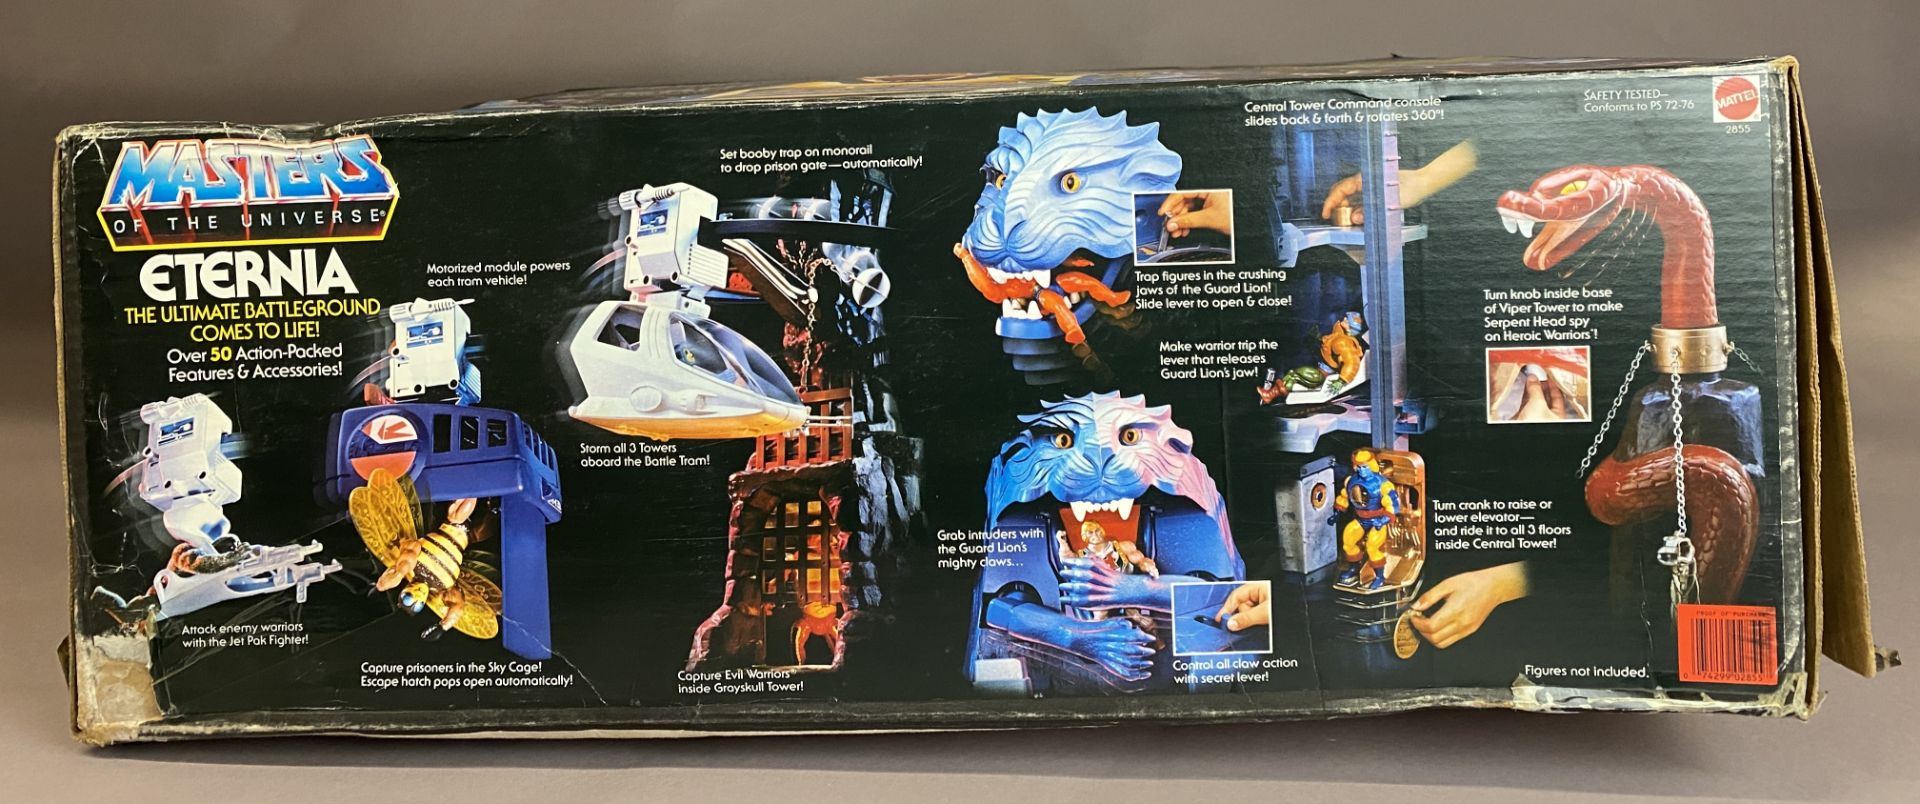 ETERNIA - Vintage Masters of the Universe Playset and Original Box (MOTU) - Appears to be complete - Image 100 of 125